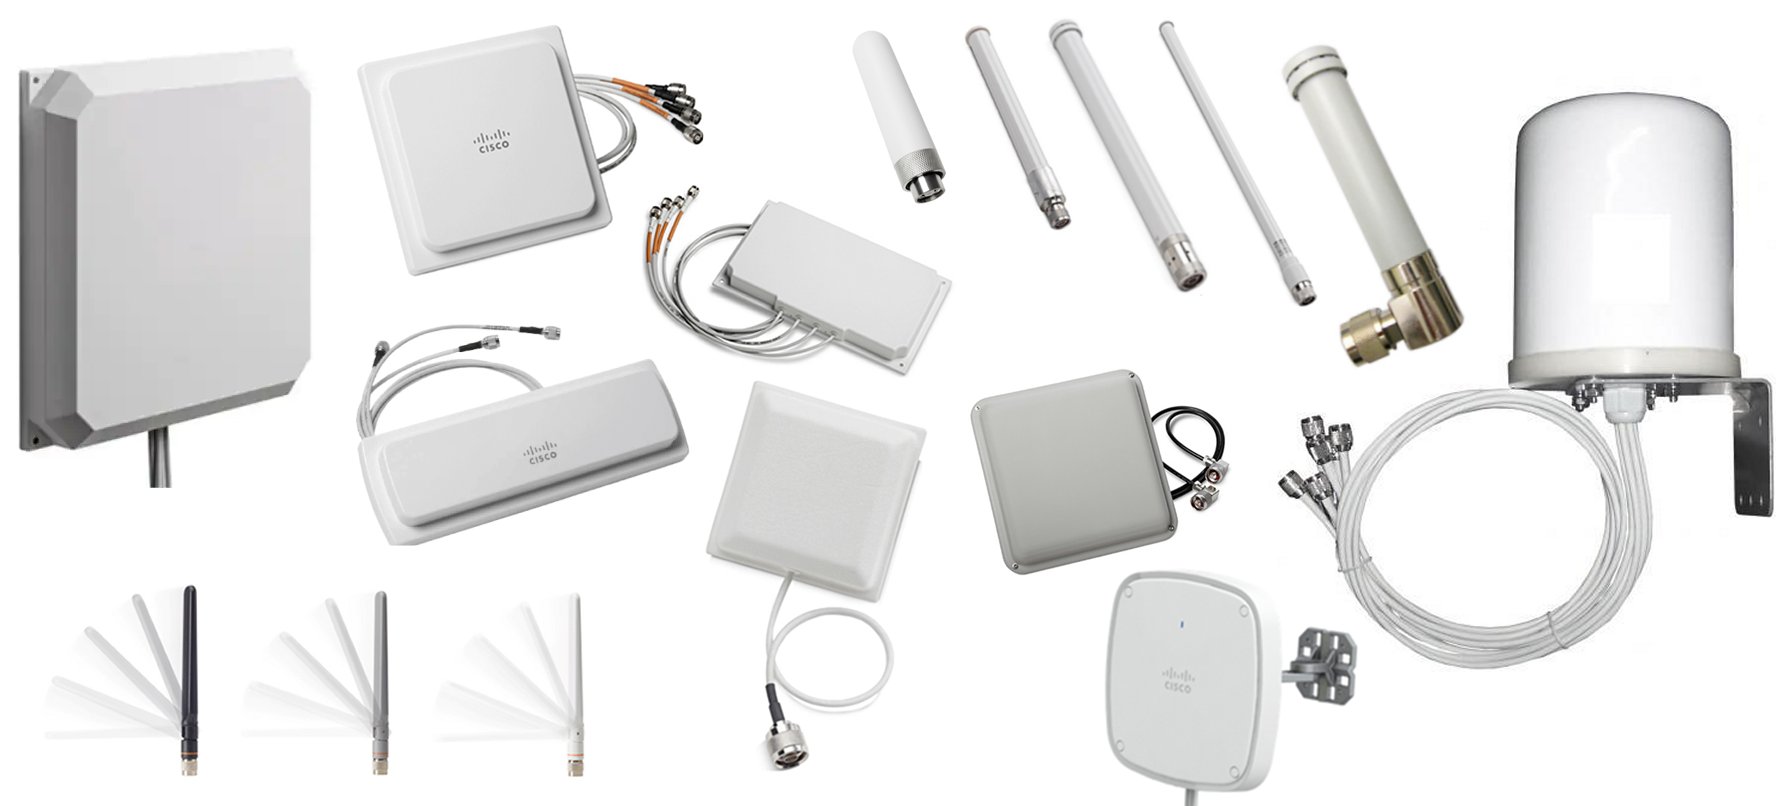 Product Image of Cisco Aironet Antennas and Accessories